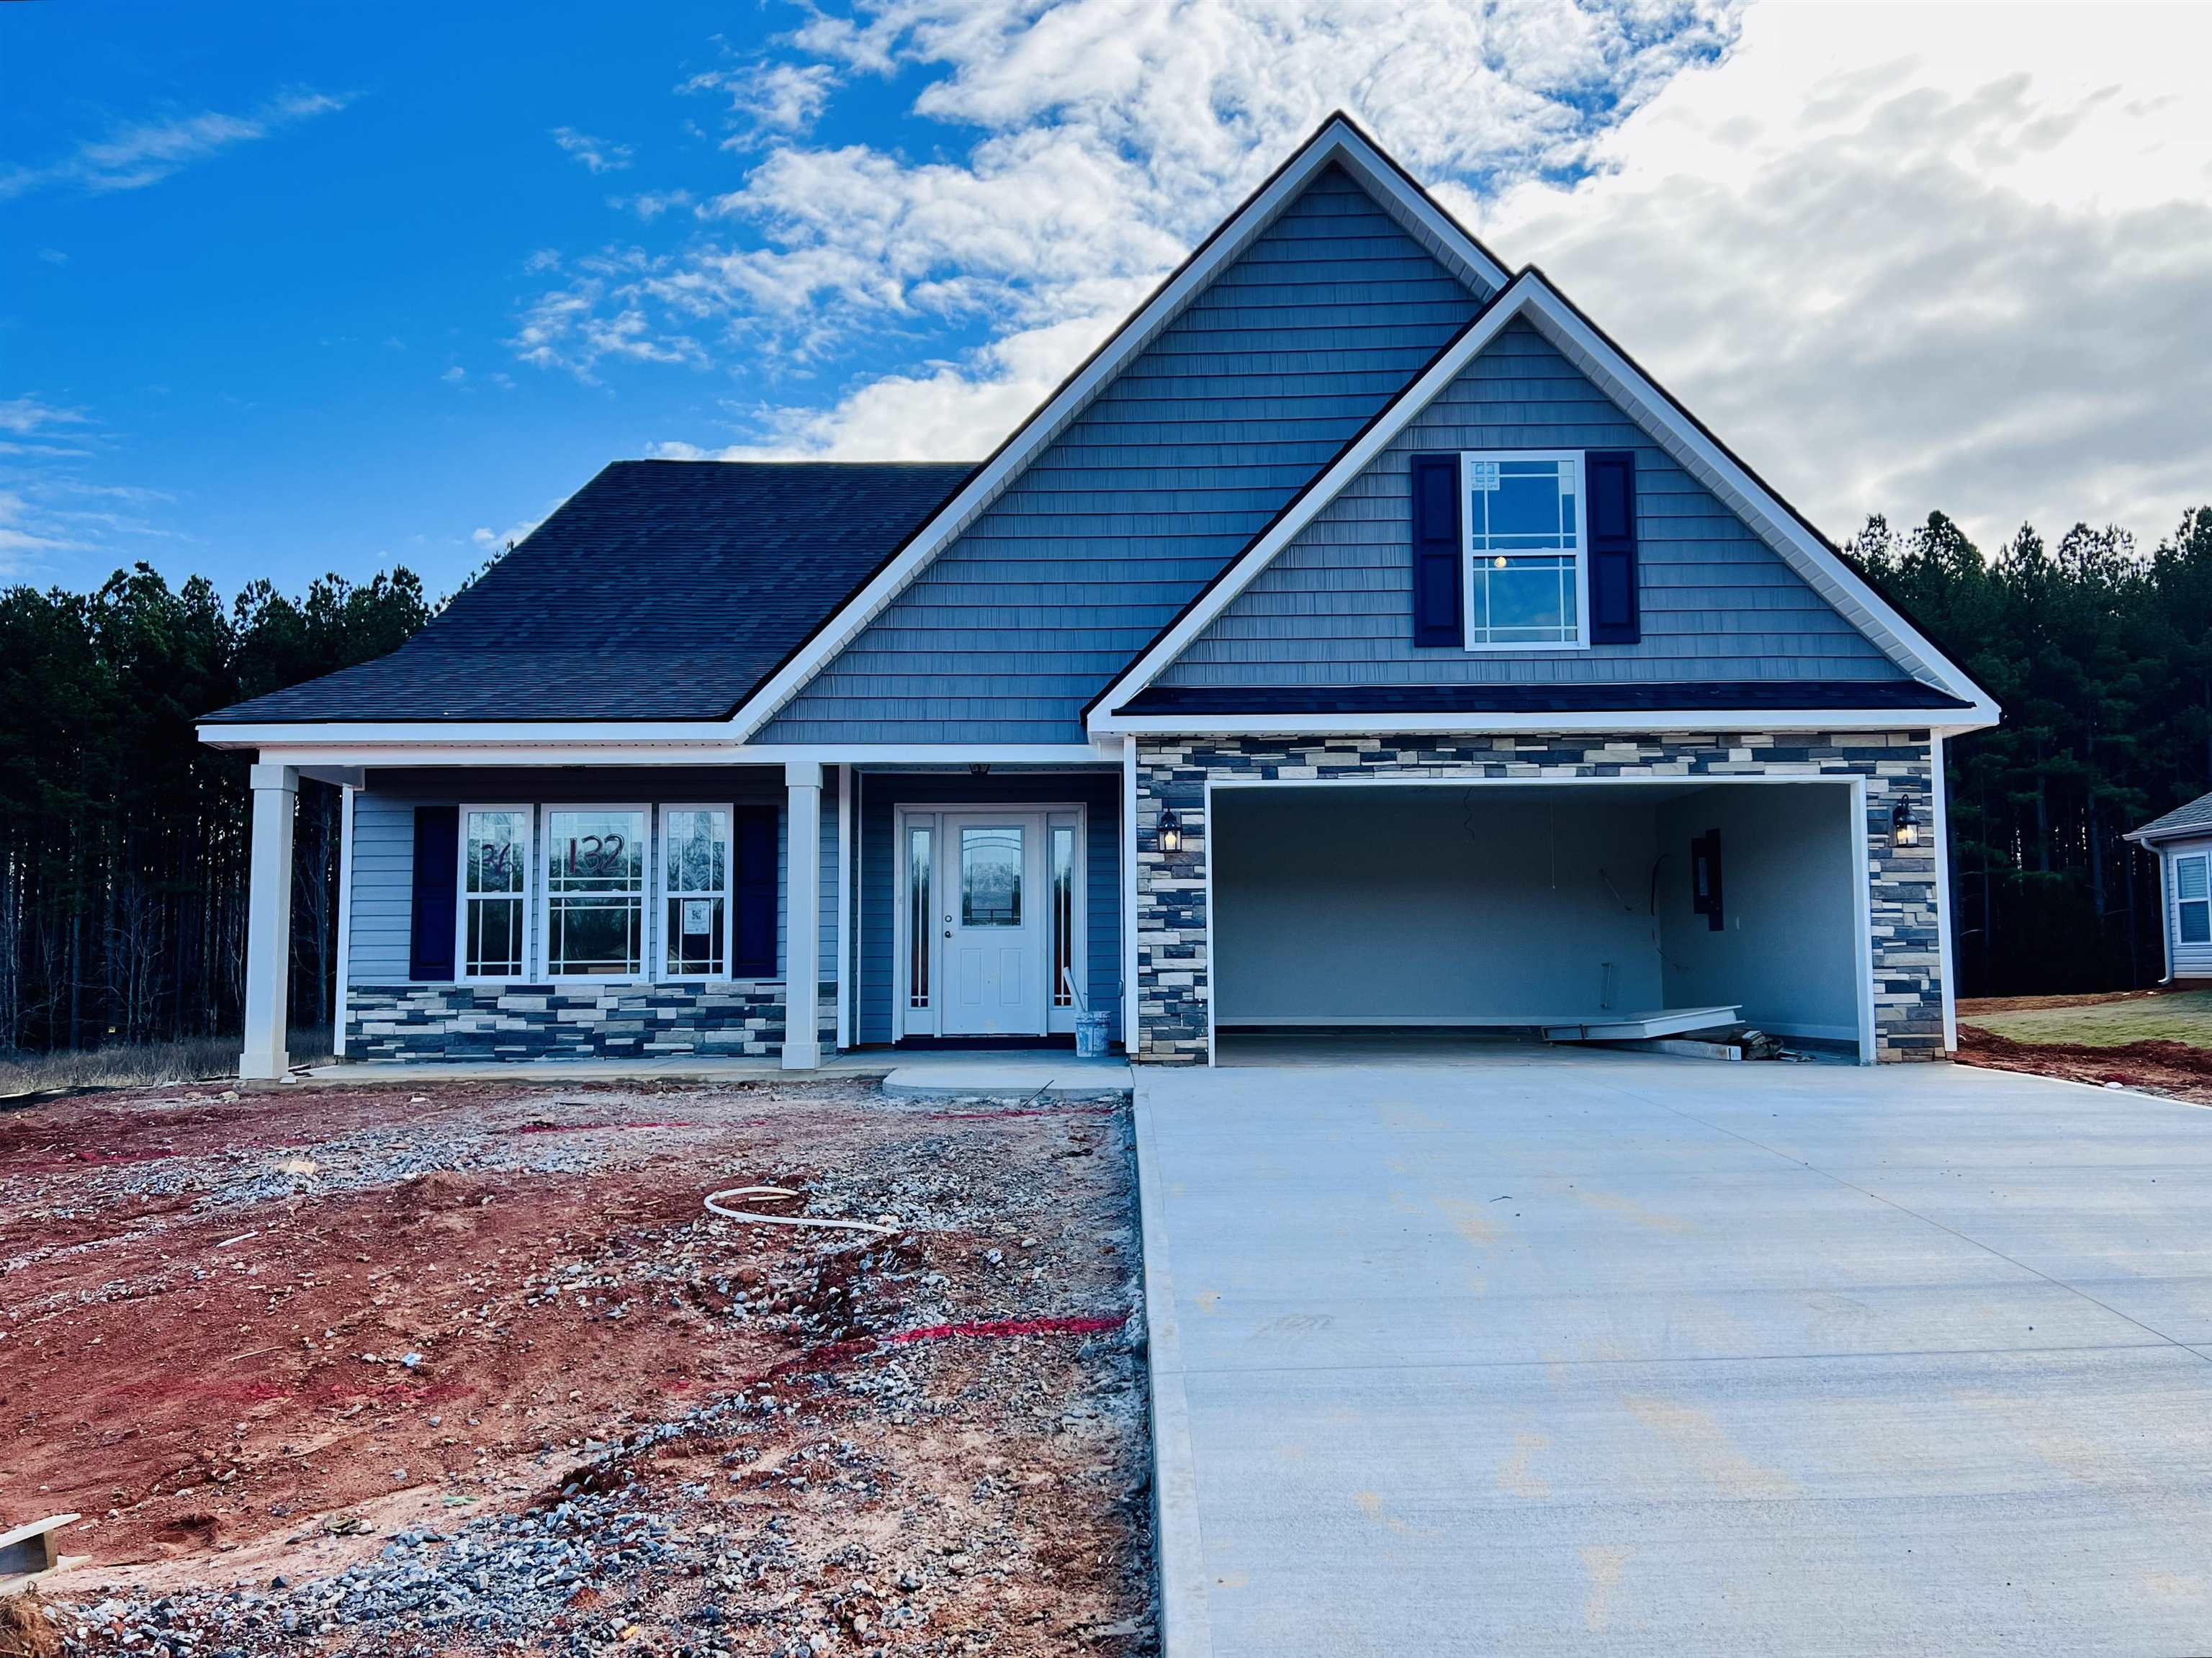 Welcome to Double Creek! The Addington plan offers a beautiful, modern layout. Spacious kitchen and formal dining. Home complete with the trademark chair rail, crown molding, and rope lighting.